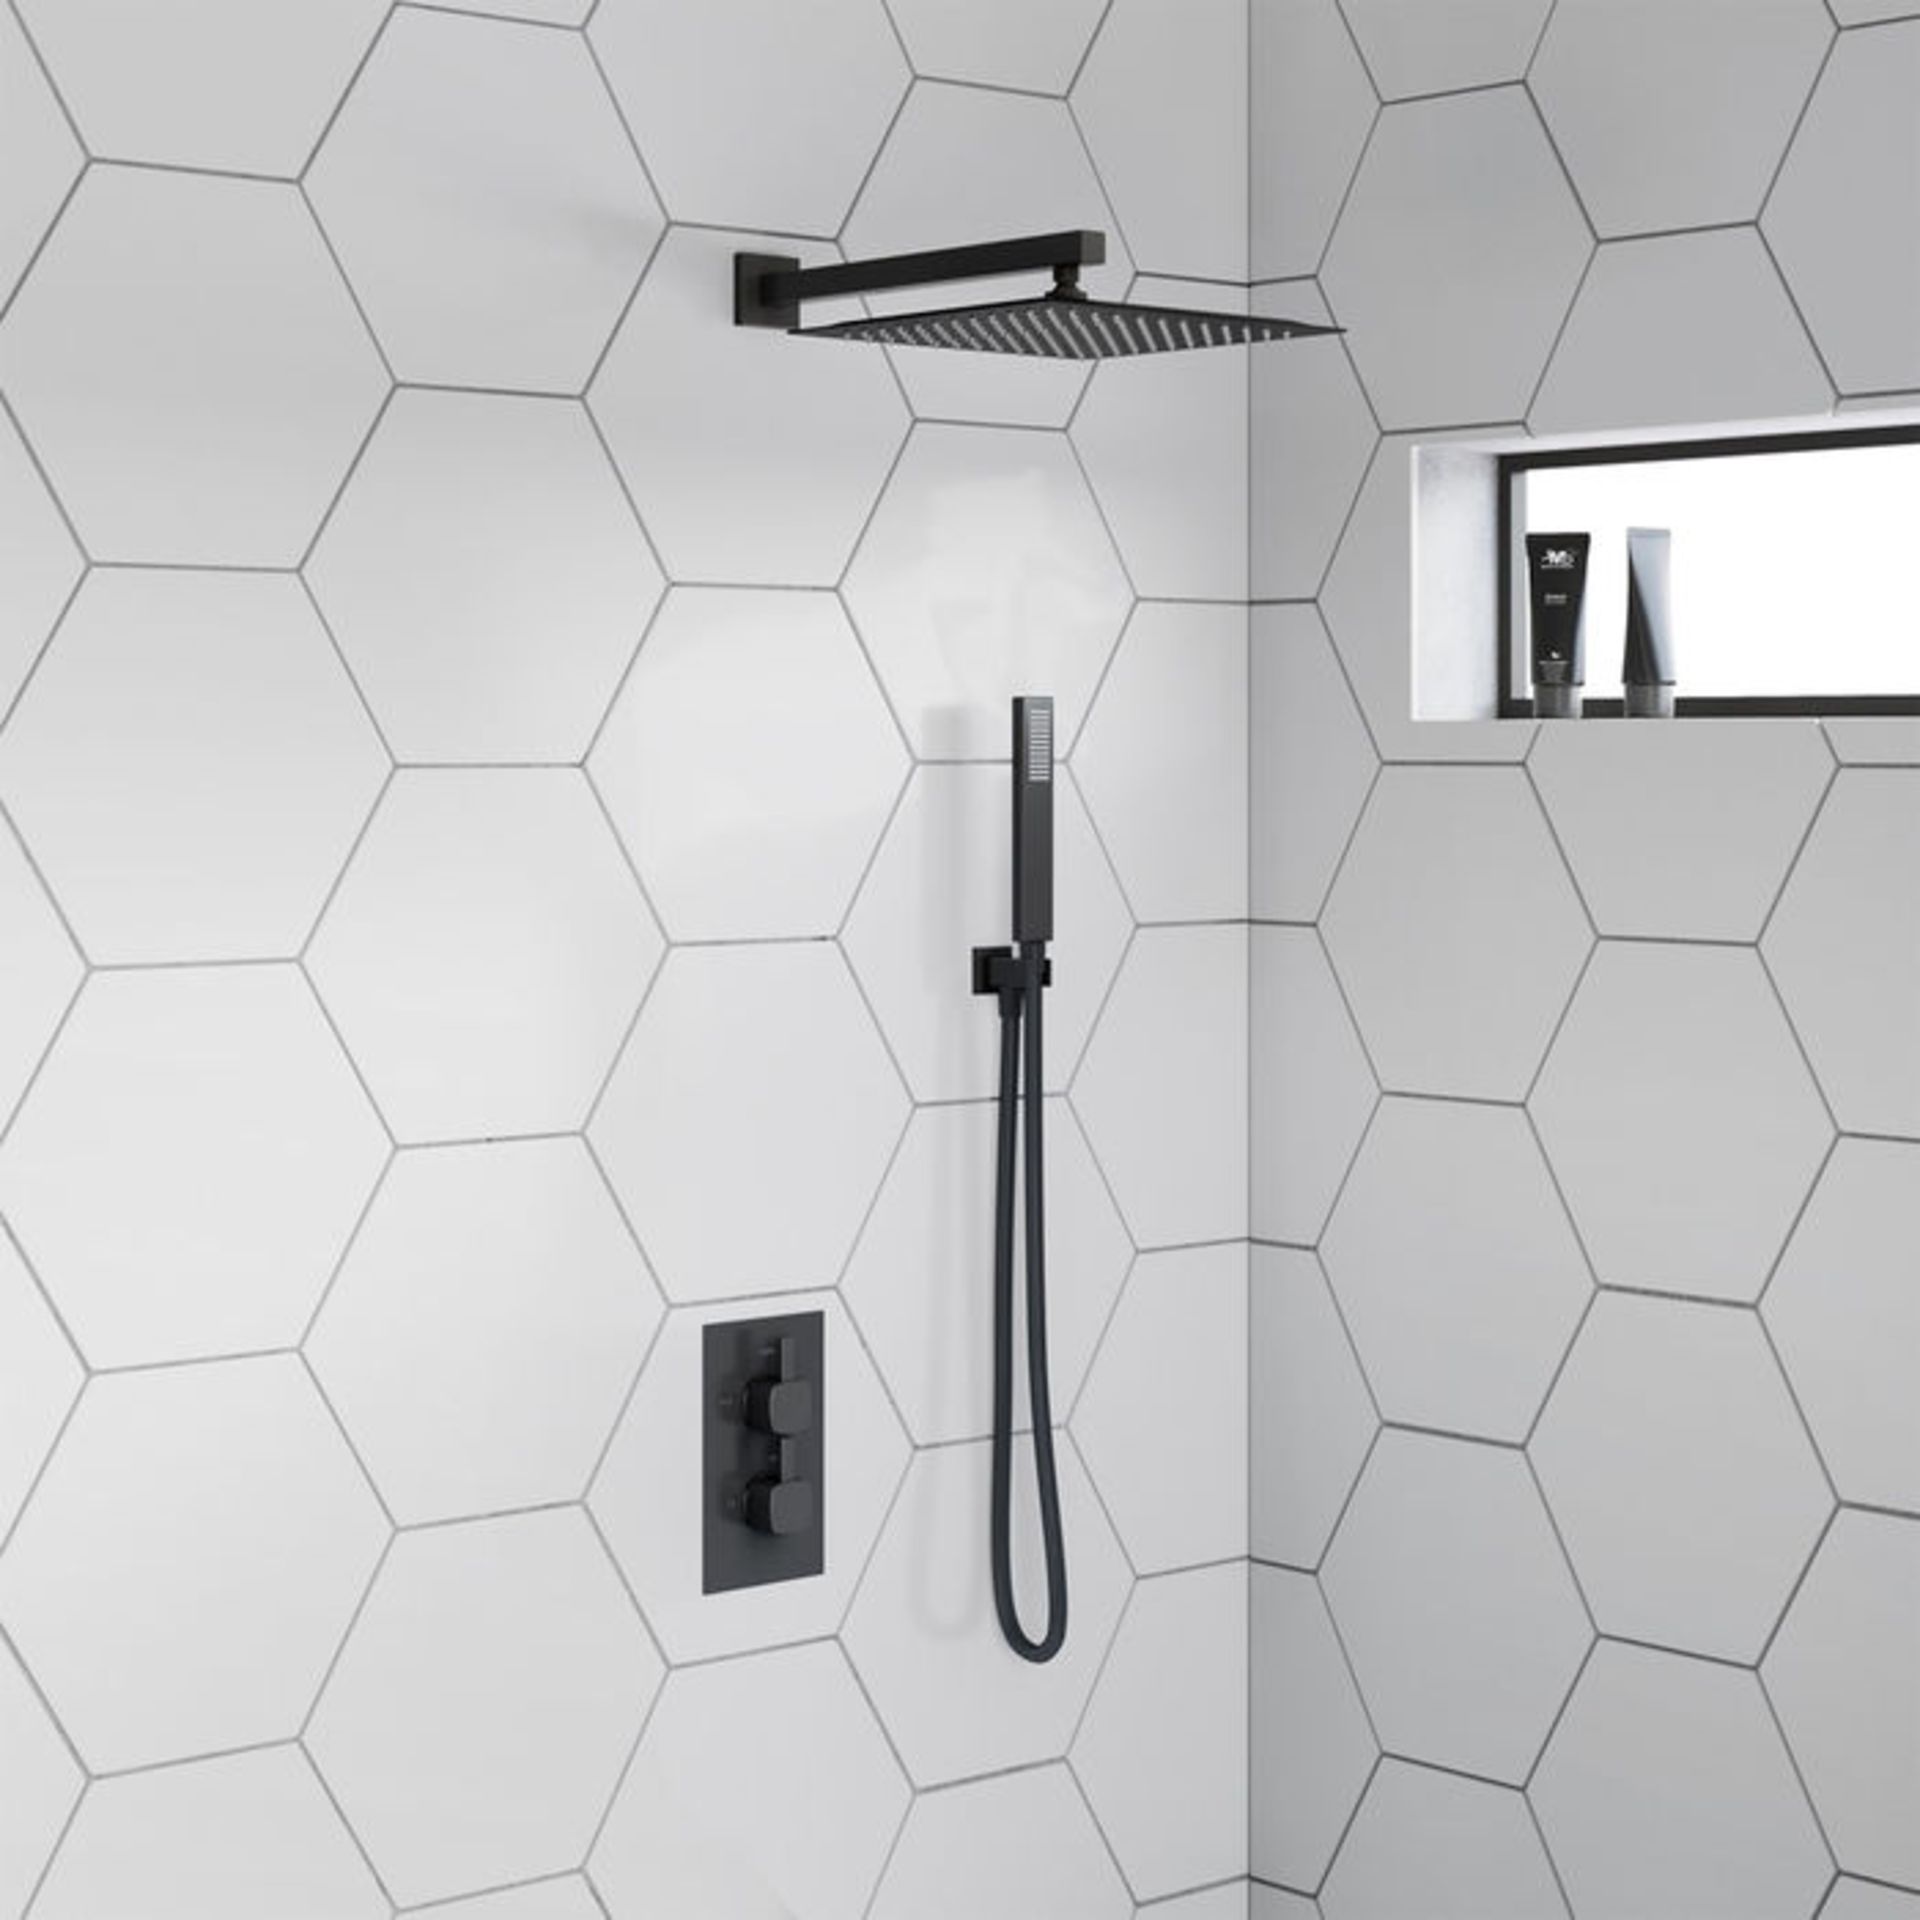 (OS123) Matte Black Square Concealed Thermostatic Mixer Shower Kit & Large Head. RRP £449.99. - Image 2 of 3